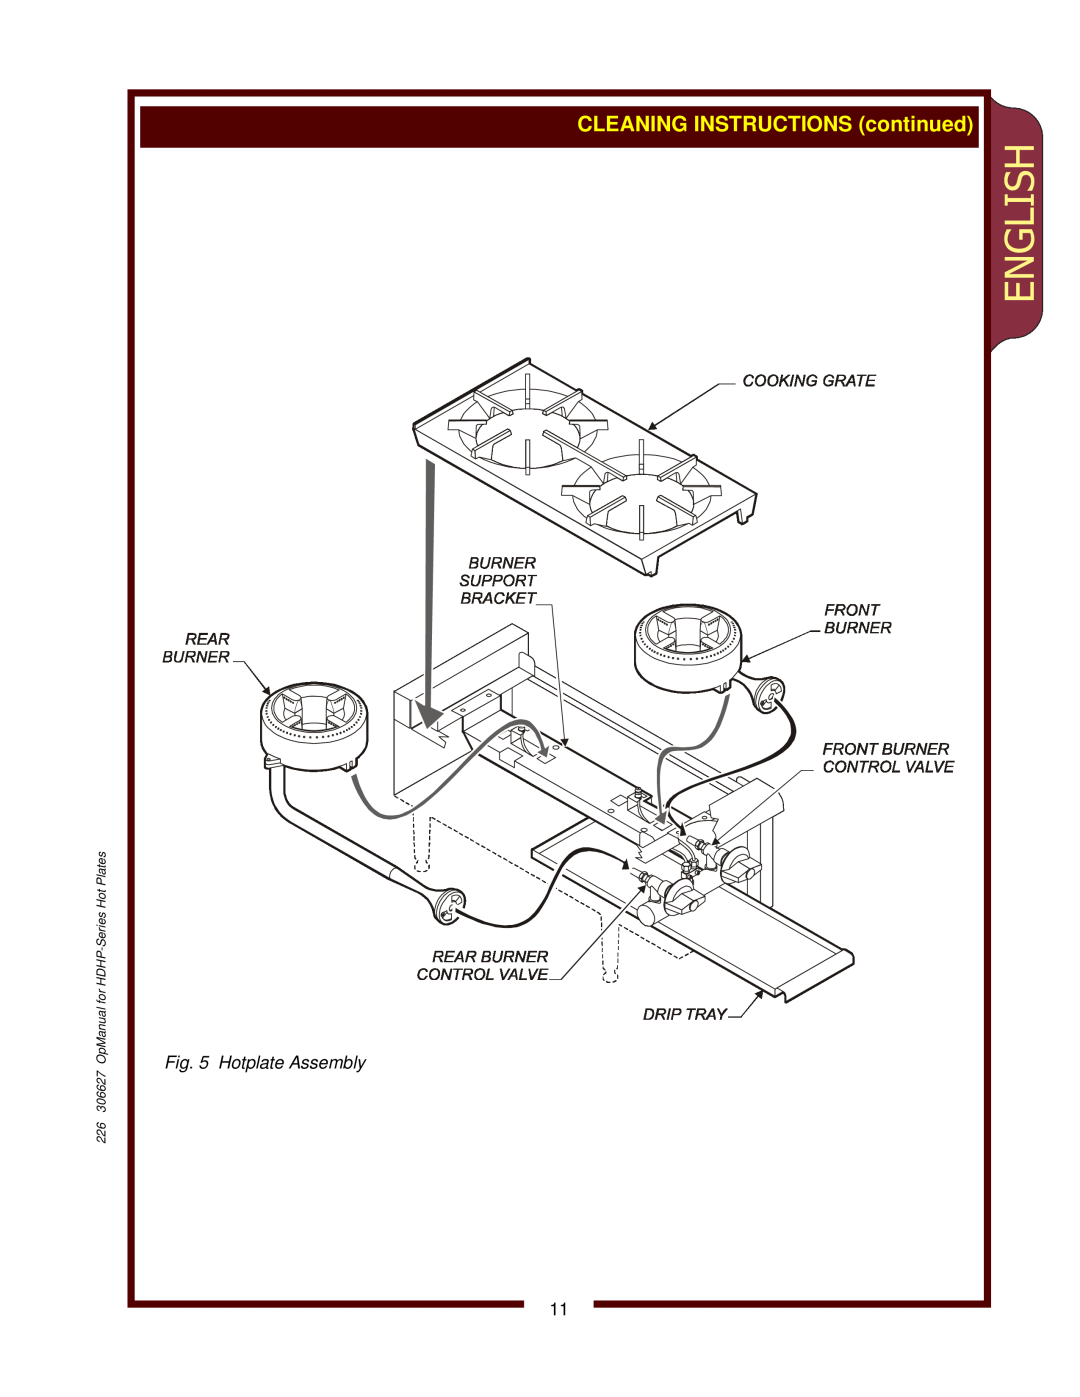 Wells HDHP-1230G, HDHP-3630G, HDHP-2430G operation manual CLEANING INSTRUCTIONS continued, English, Hotplate Assembly 